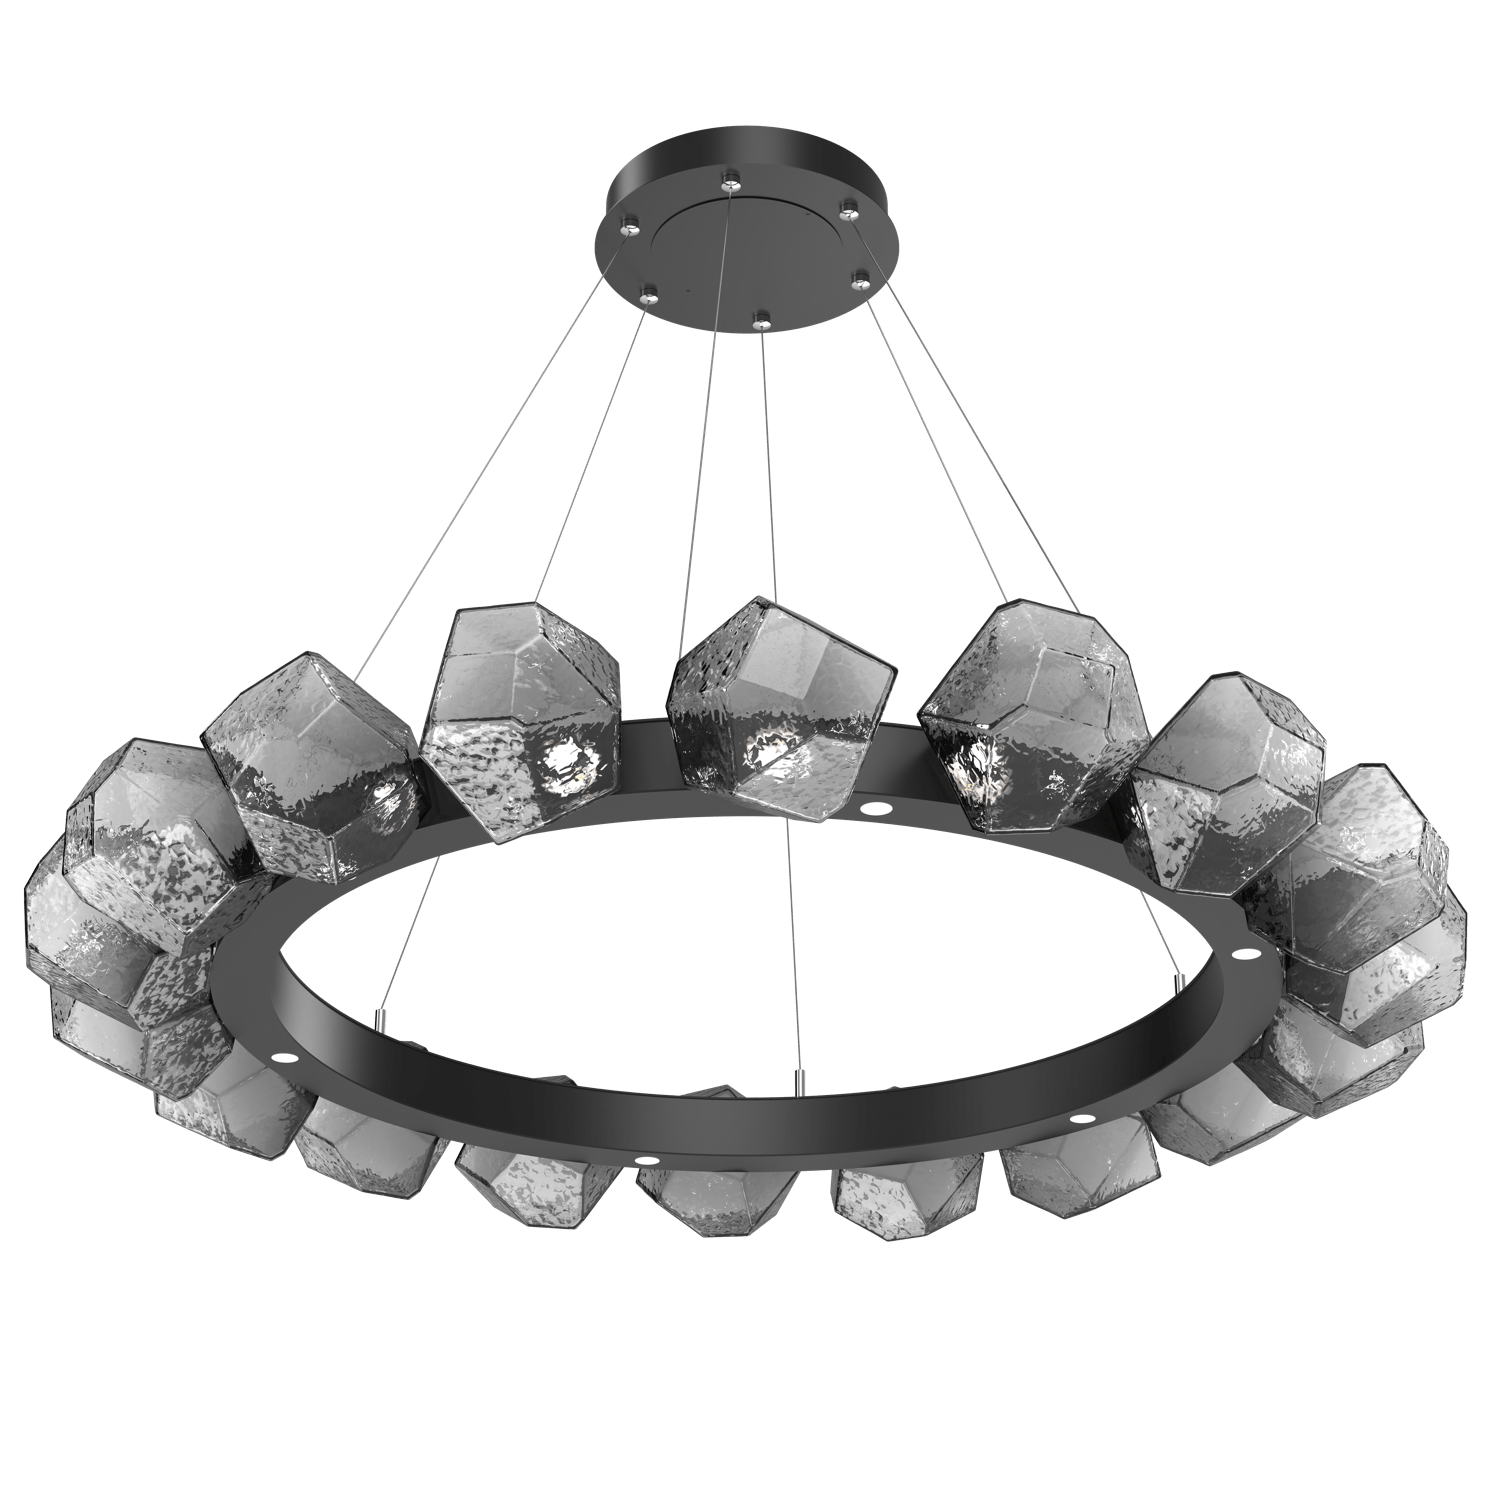 CHB0039-48-MB-S-Hammerton-Studio-Gem-48-inch-radial-ring-chandelier-with-matte-black-finish-and-smoke-blown-glass-shades-and-LED-lamping